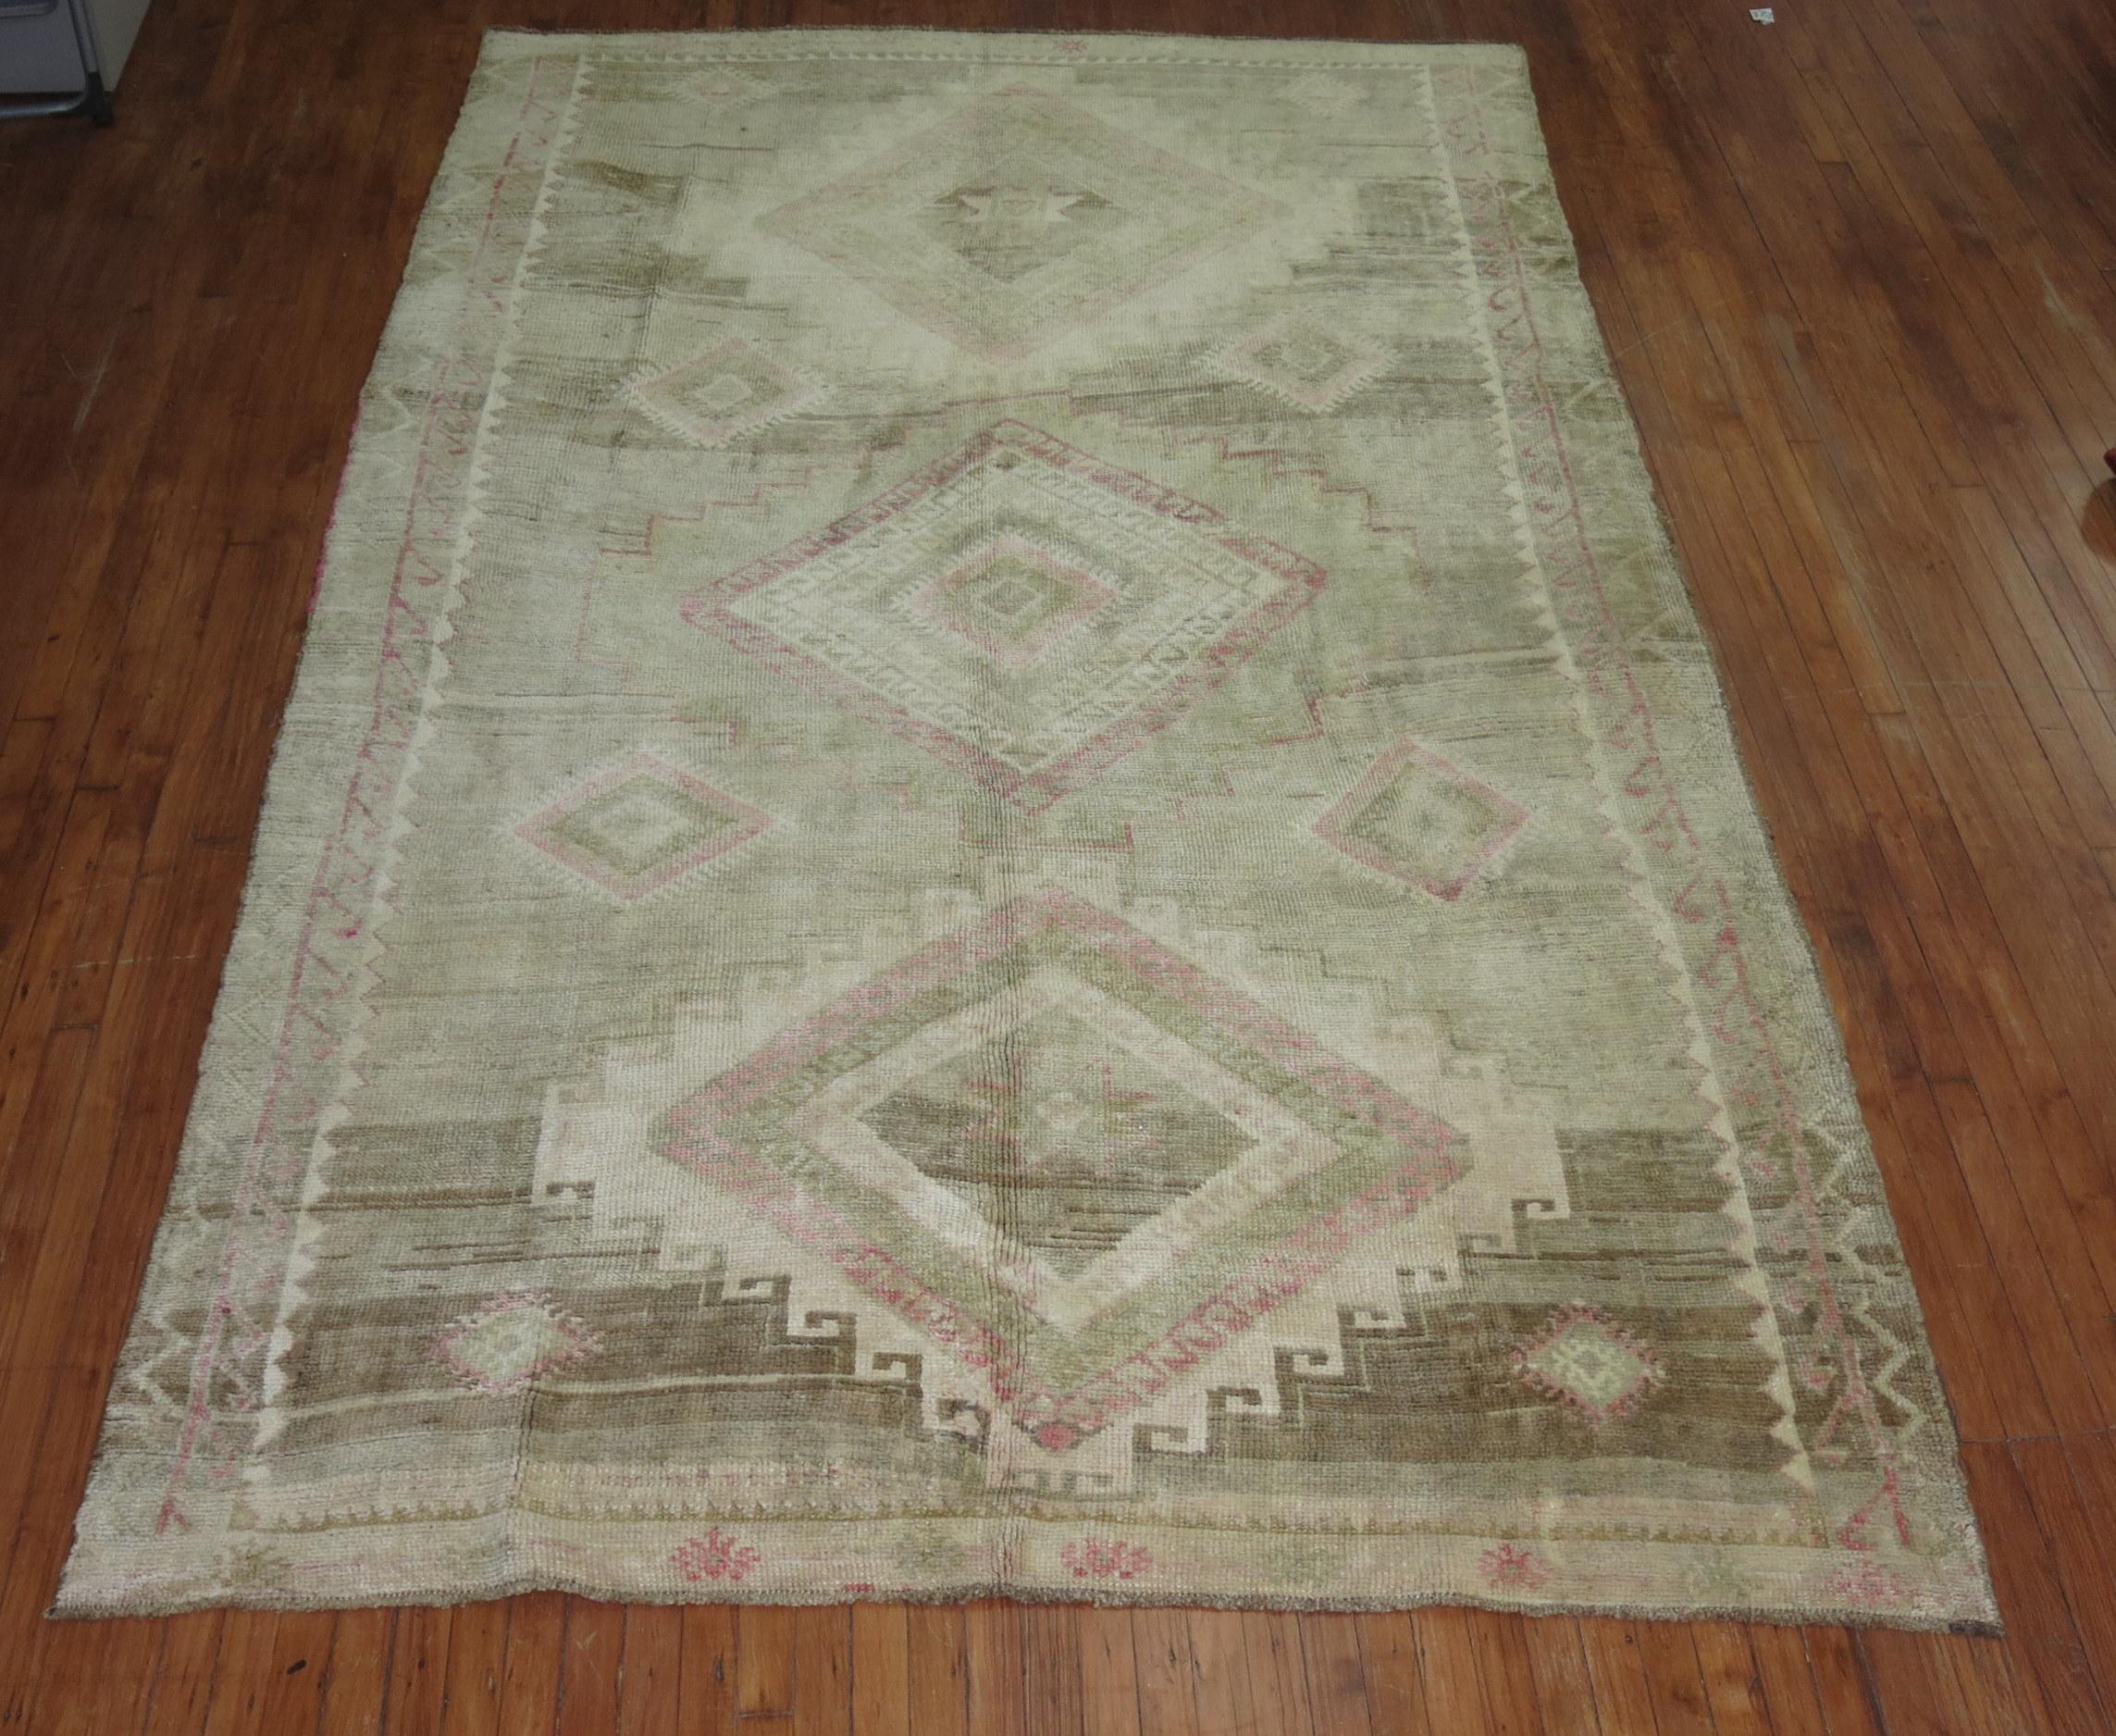 mid-20th century Turkish Geometric rug featuring pops of pink with a neutral color base

6'8'' x 11'2''

